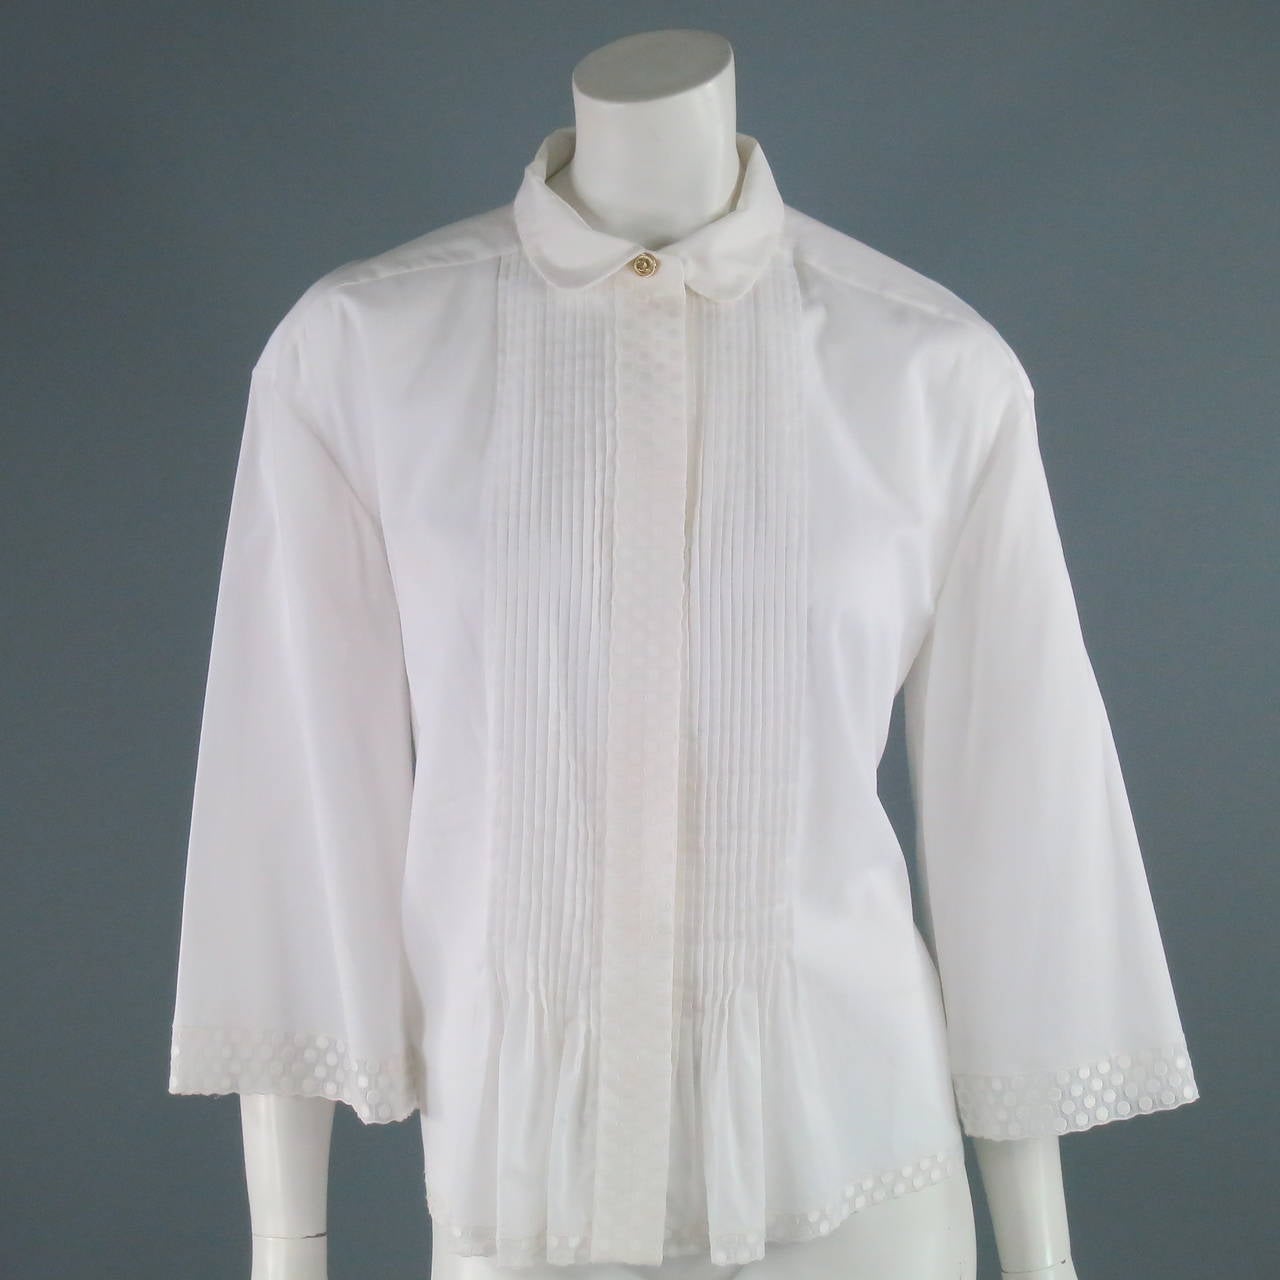 This beautiful oversized CHANEL blouse is made from 100% cotton. Delicate pleated front detail and white polka dot trim.  Made in France.
 
 Excellent Pre- Owned Condition.

Measurements:
Bust- 40 in.
Length of Blouse- 24 1/2 in.
Length of